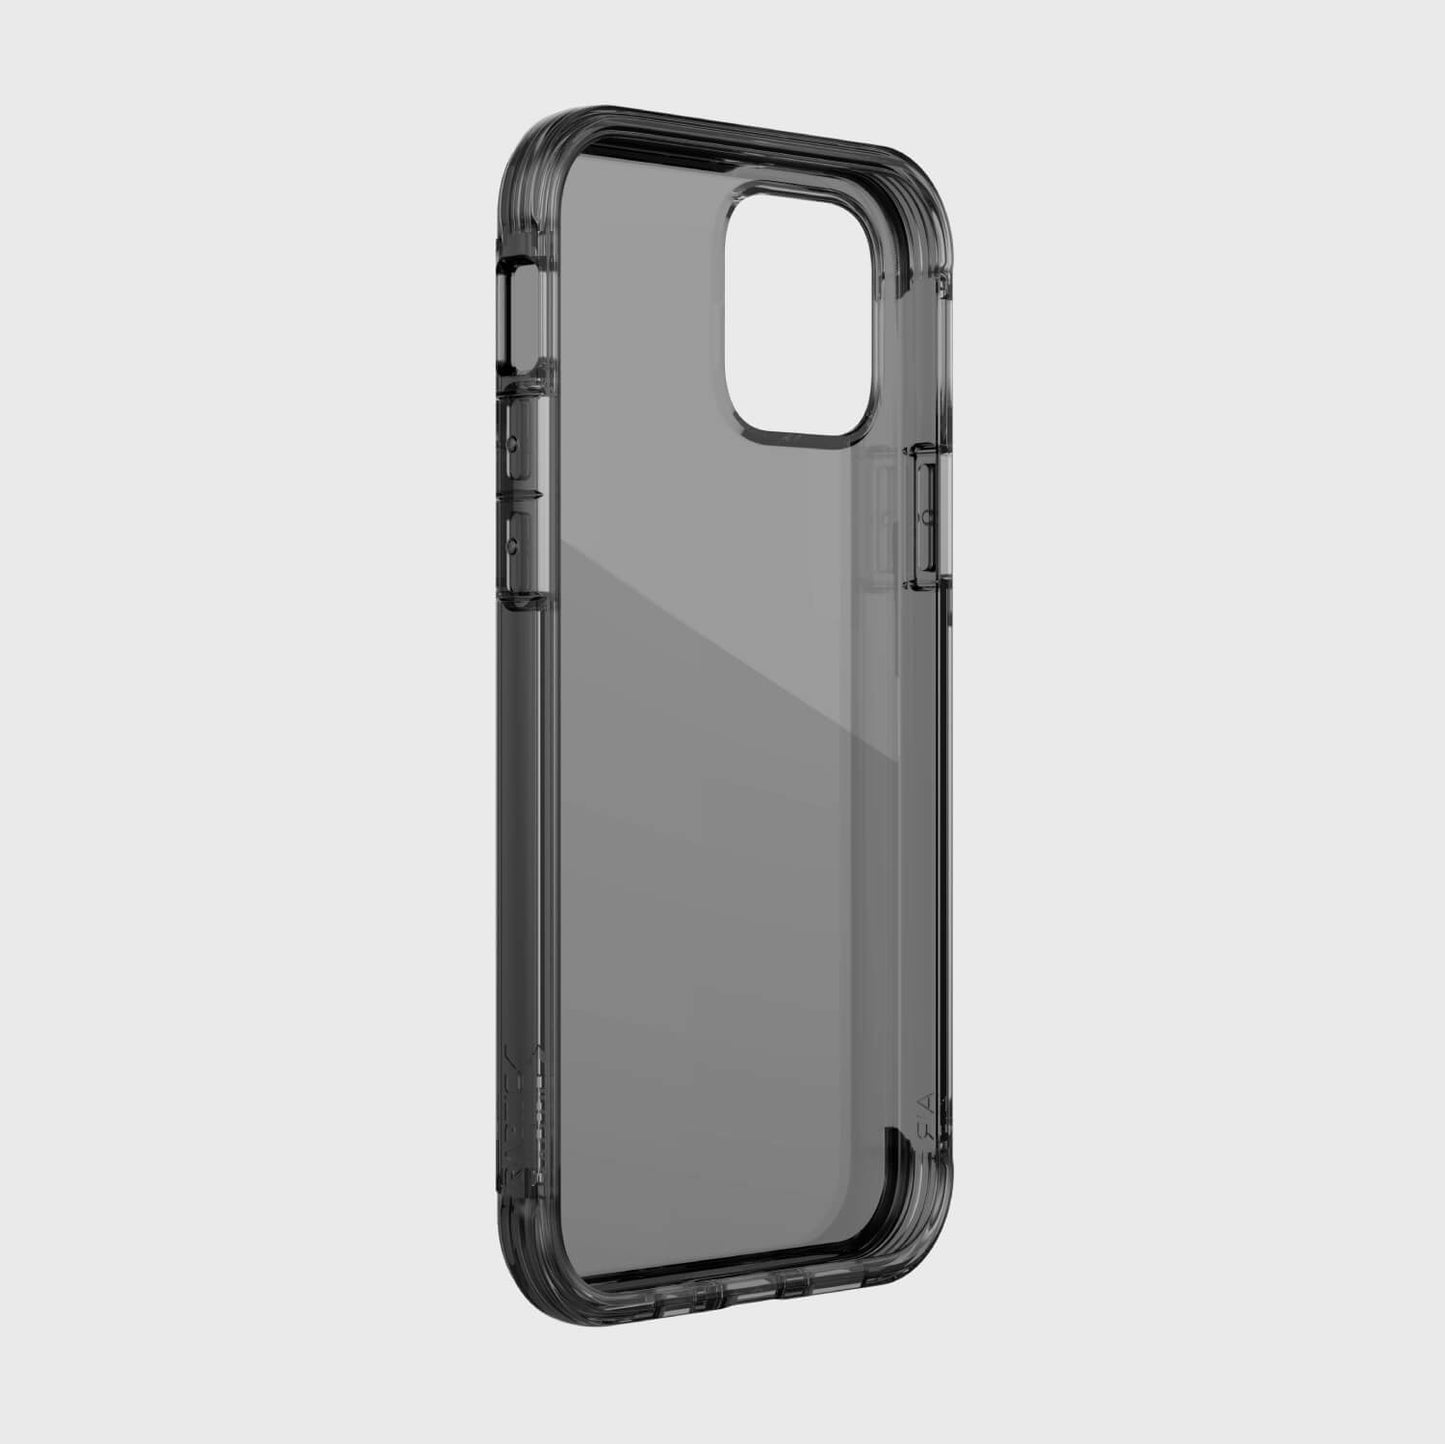 The back view of a Raptic AIR iPhone 12 Pro Max Case with 4-metre drop protection.